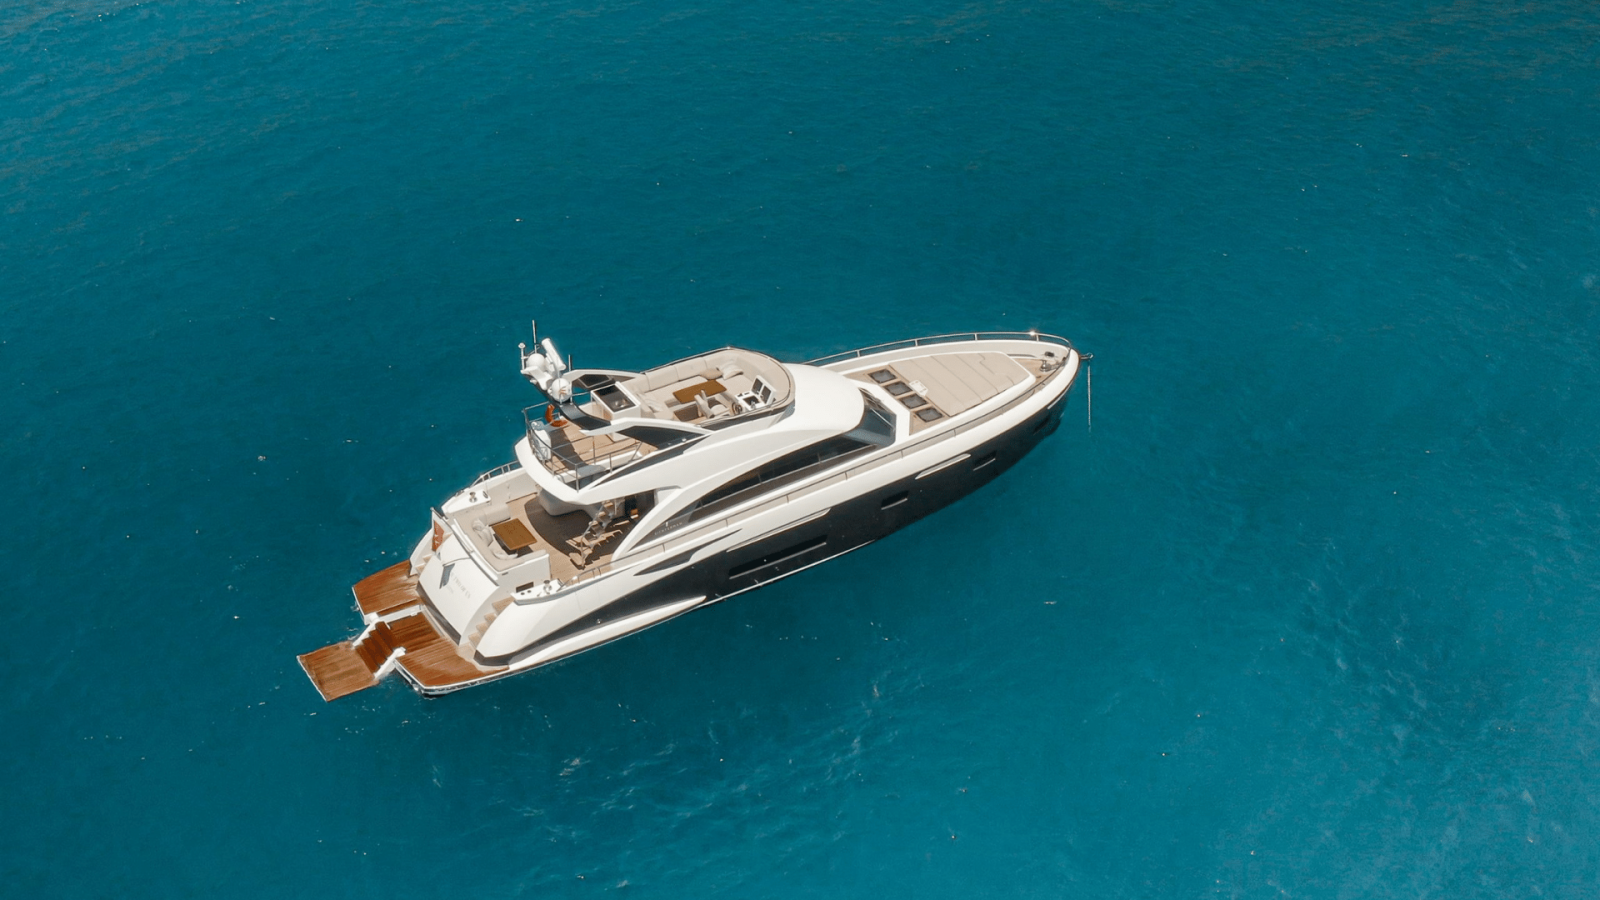 Yachts & Superyachts, The Ultimate Directory